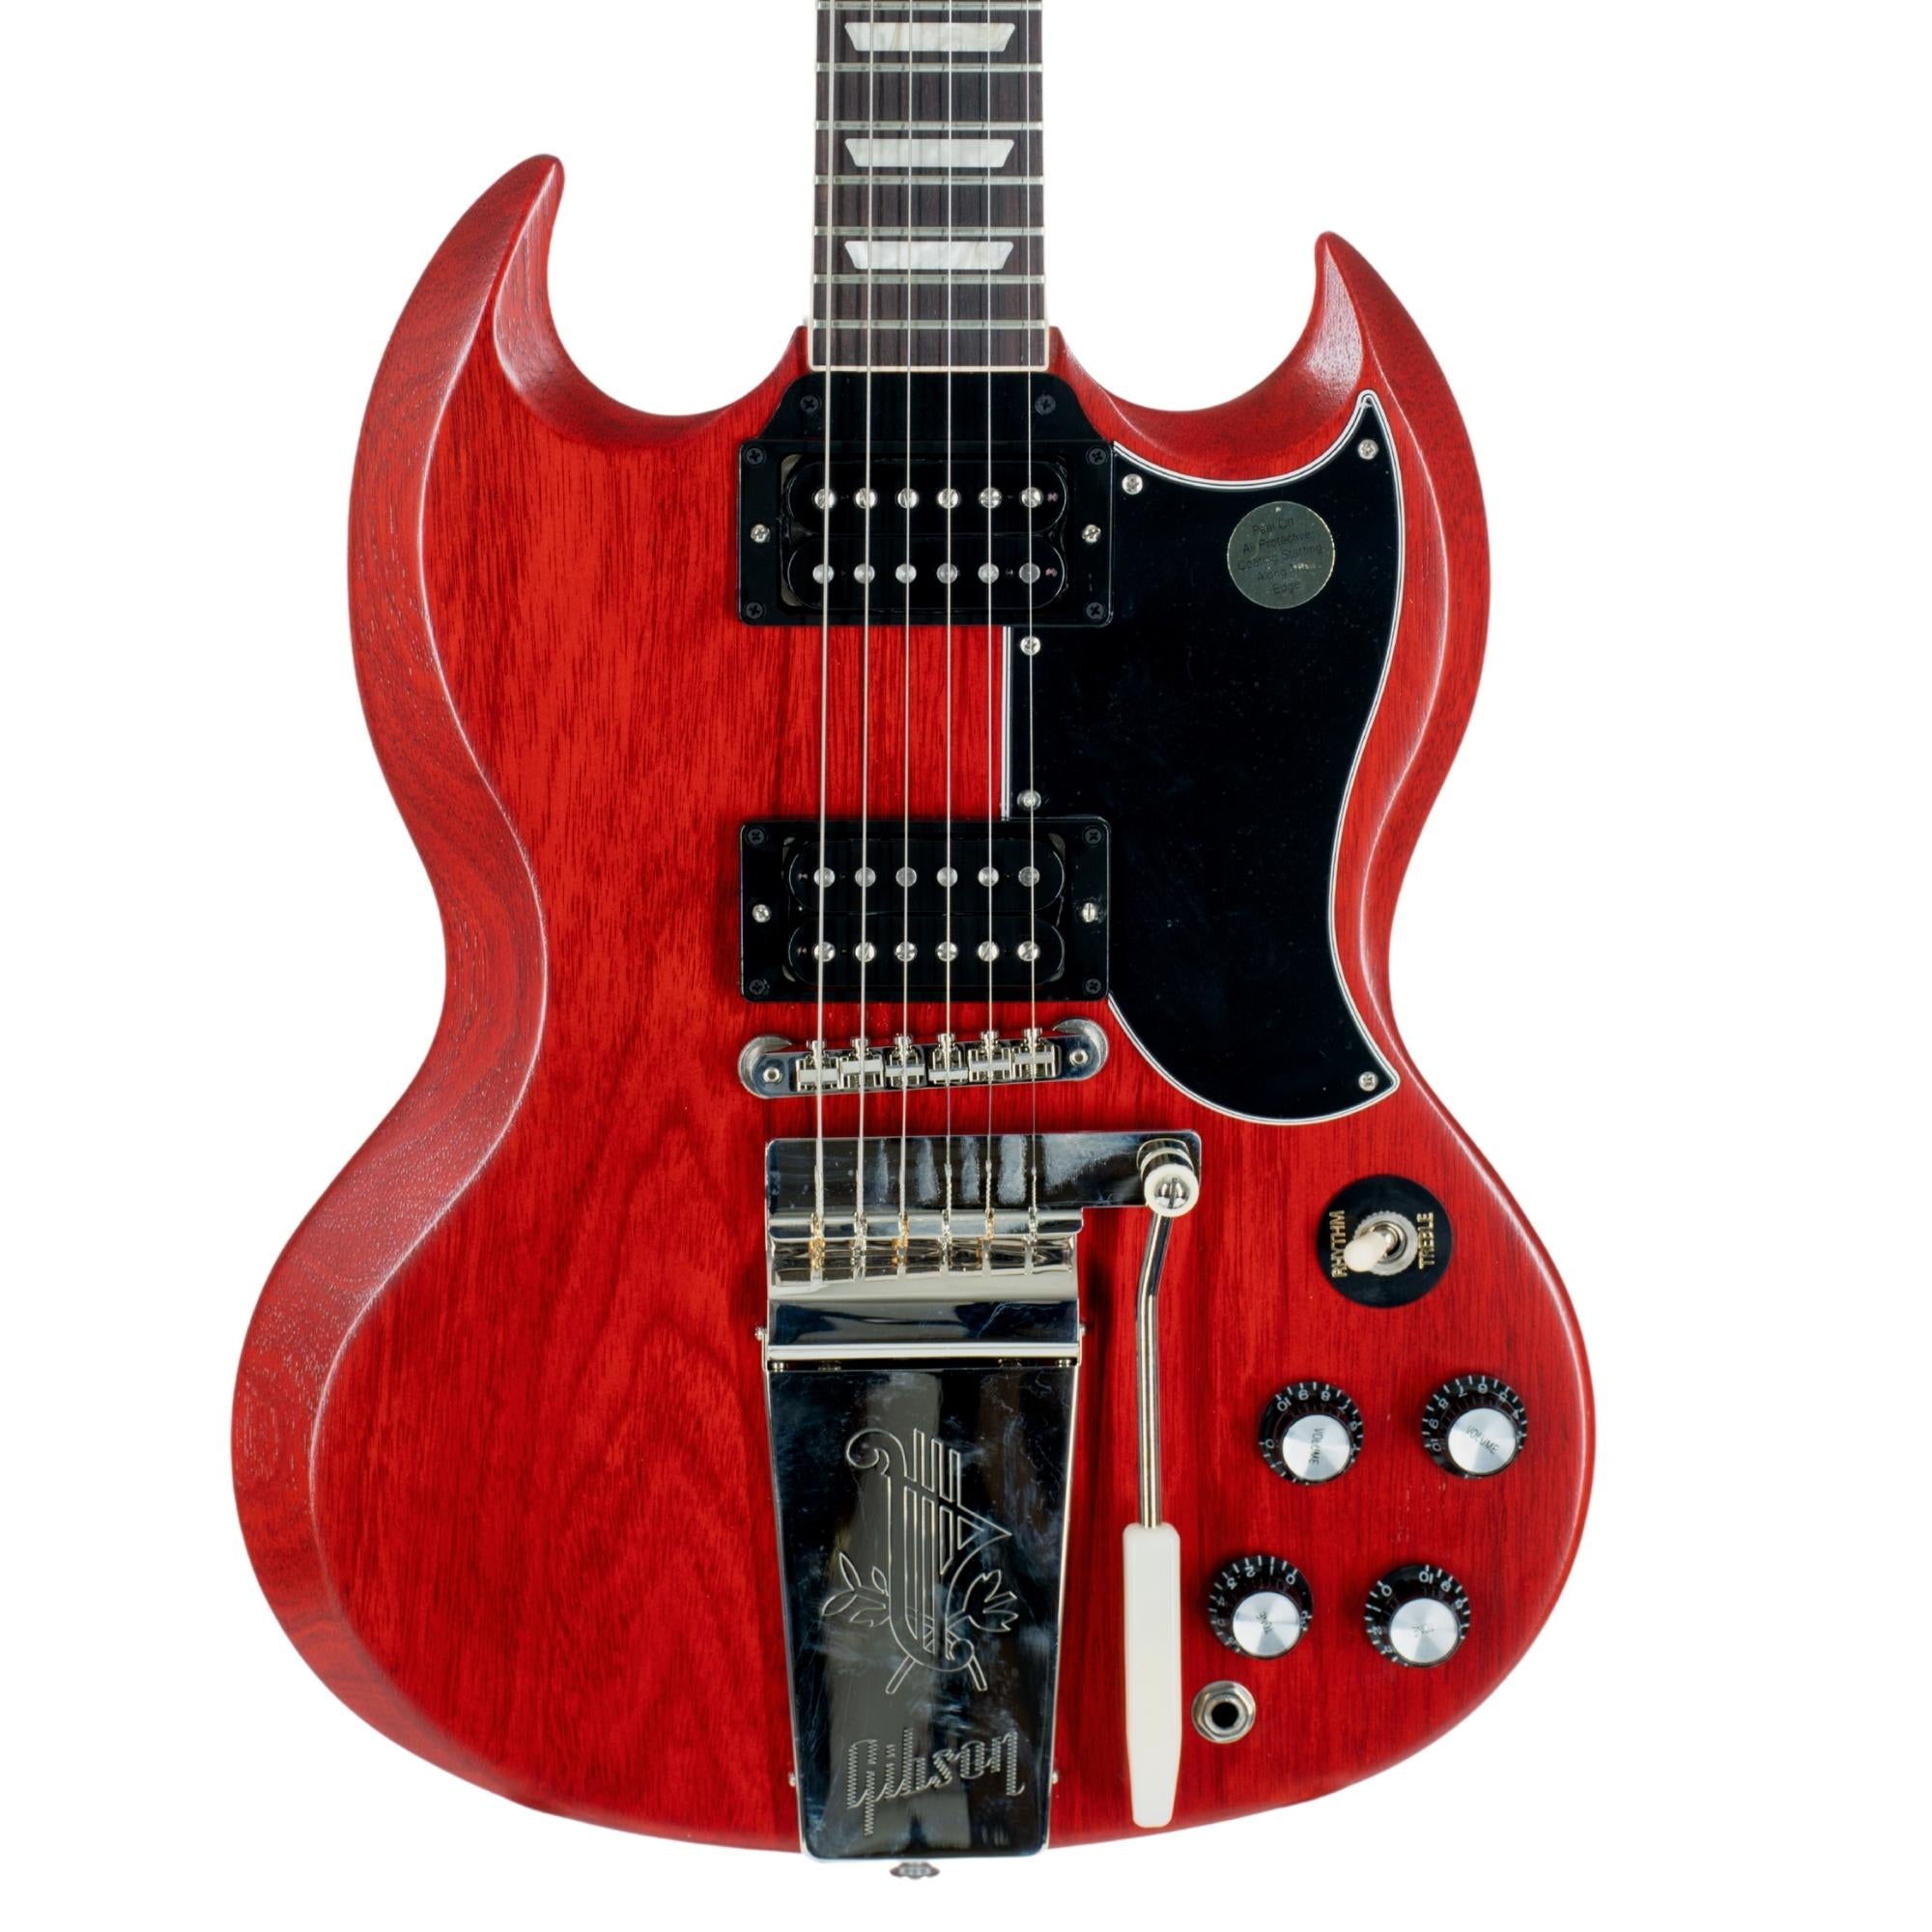 Gibson SG Standard '61 Faded Maestro Vibrola, Vintage Cherry Electric